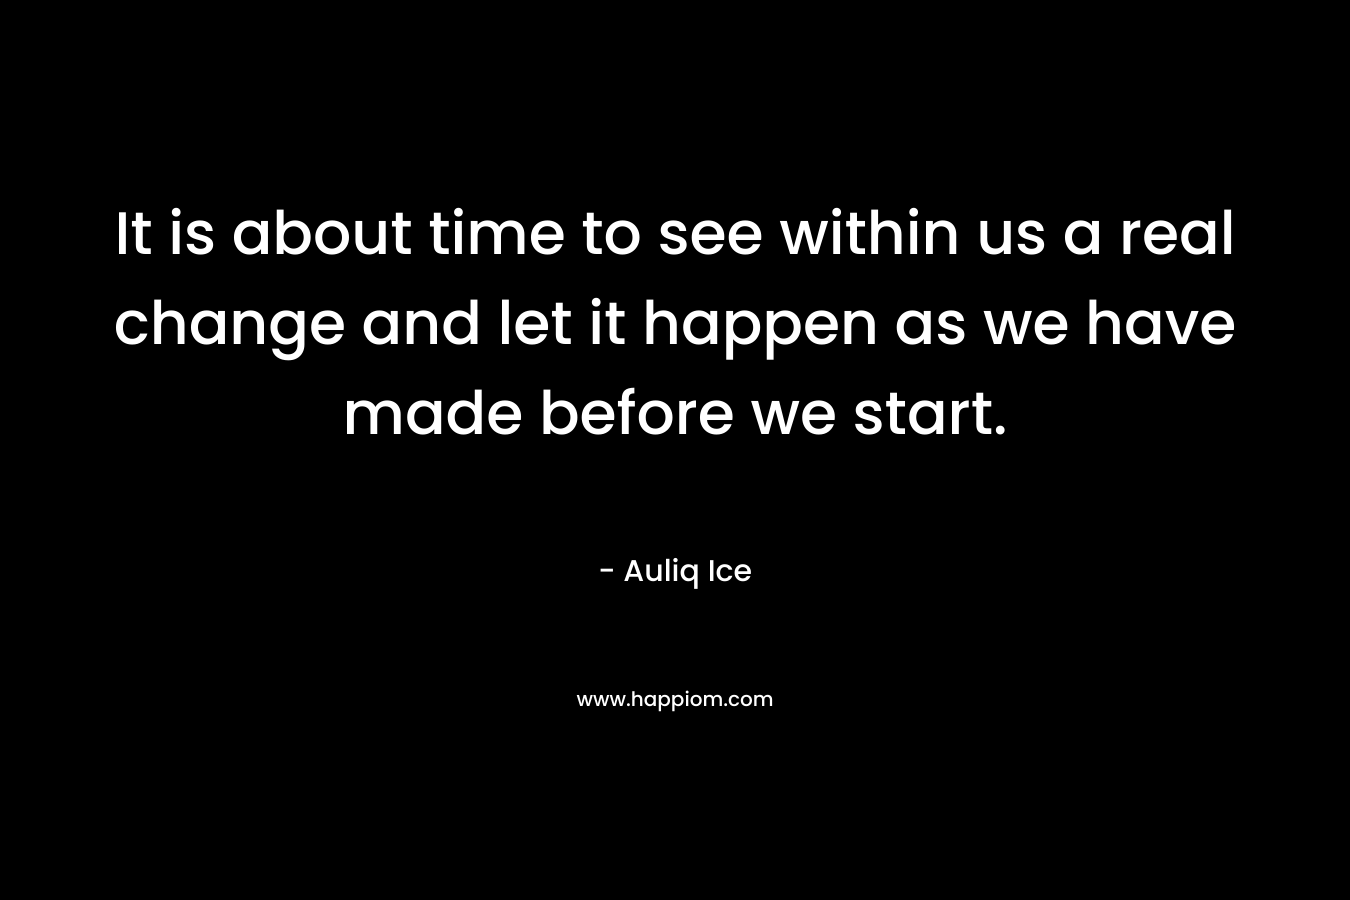 It is about time to see within us a real change and let it happen as we have made before we start.